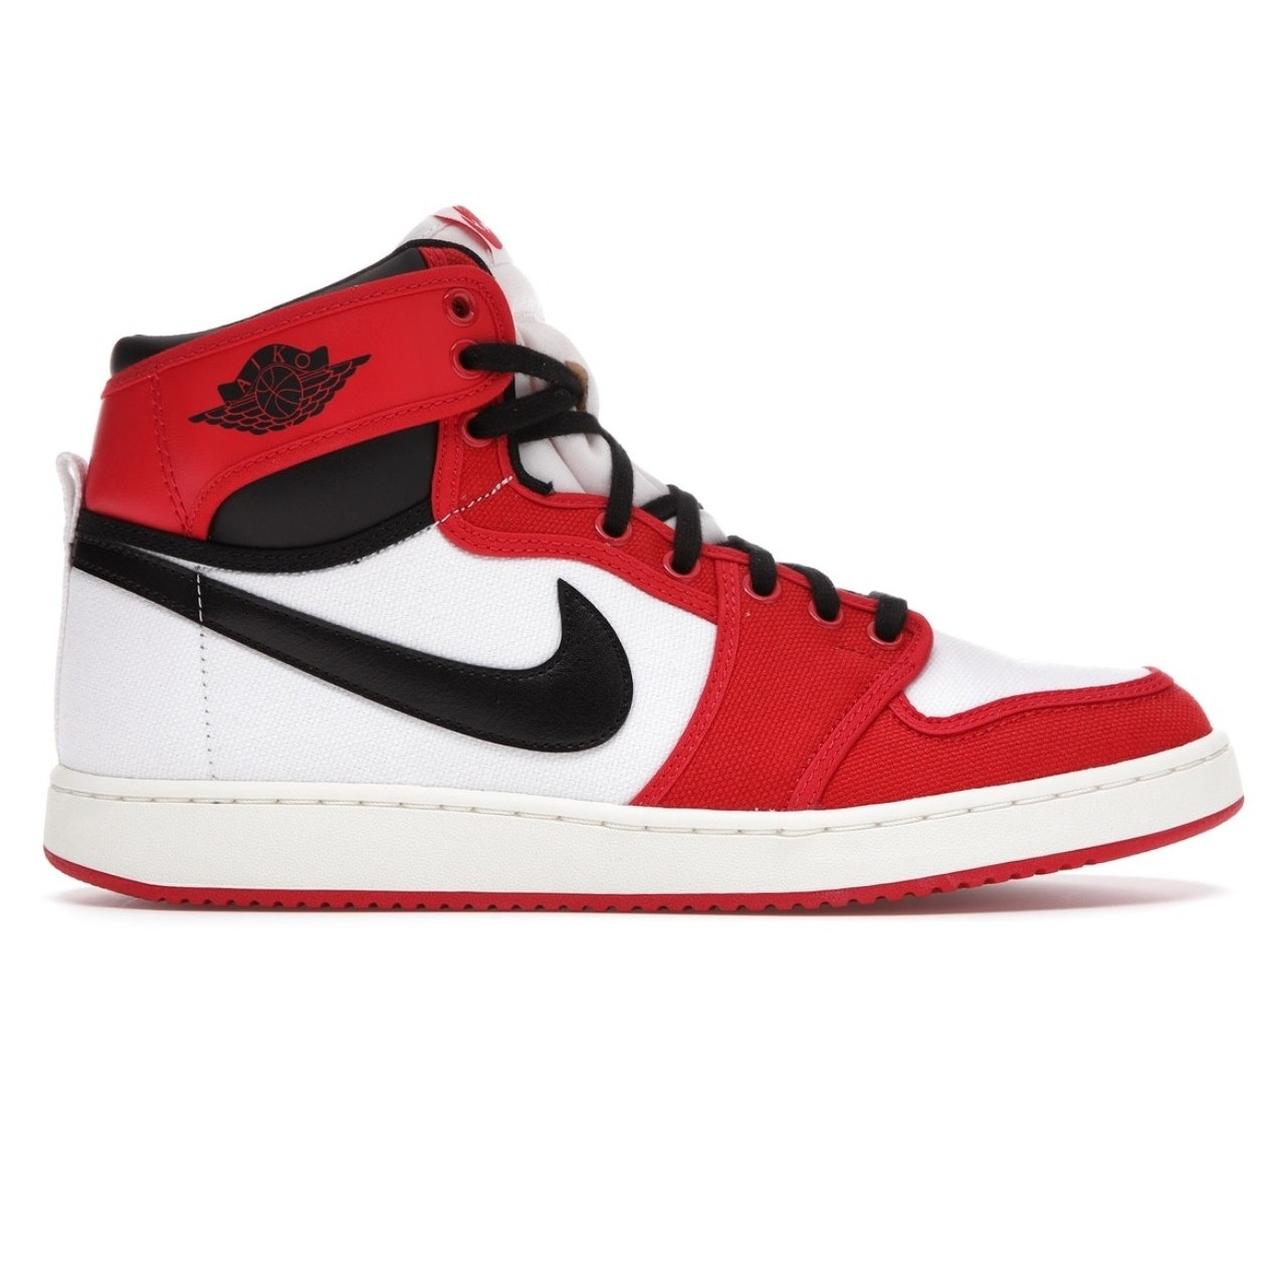 Jordan Men's Red and White Trainers (2)